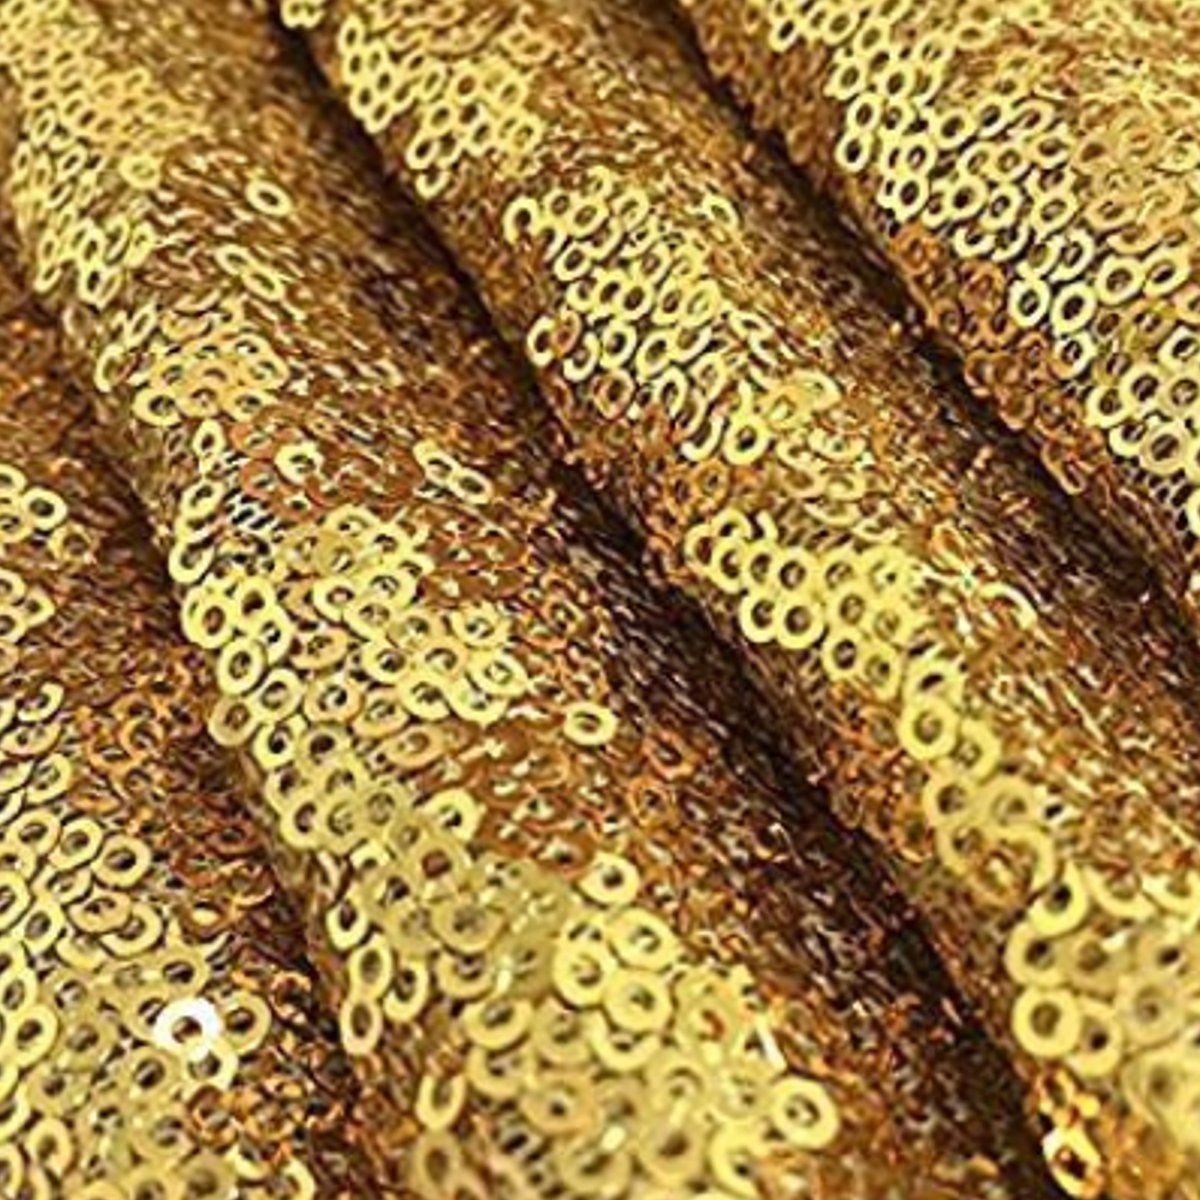 2-Panels-2FTX6FT-Sparkly-Gold-Sequin-Curtain-Potography-Backdrop-Wedding-Decoration-Props-1141786